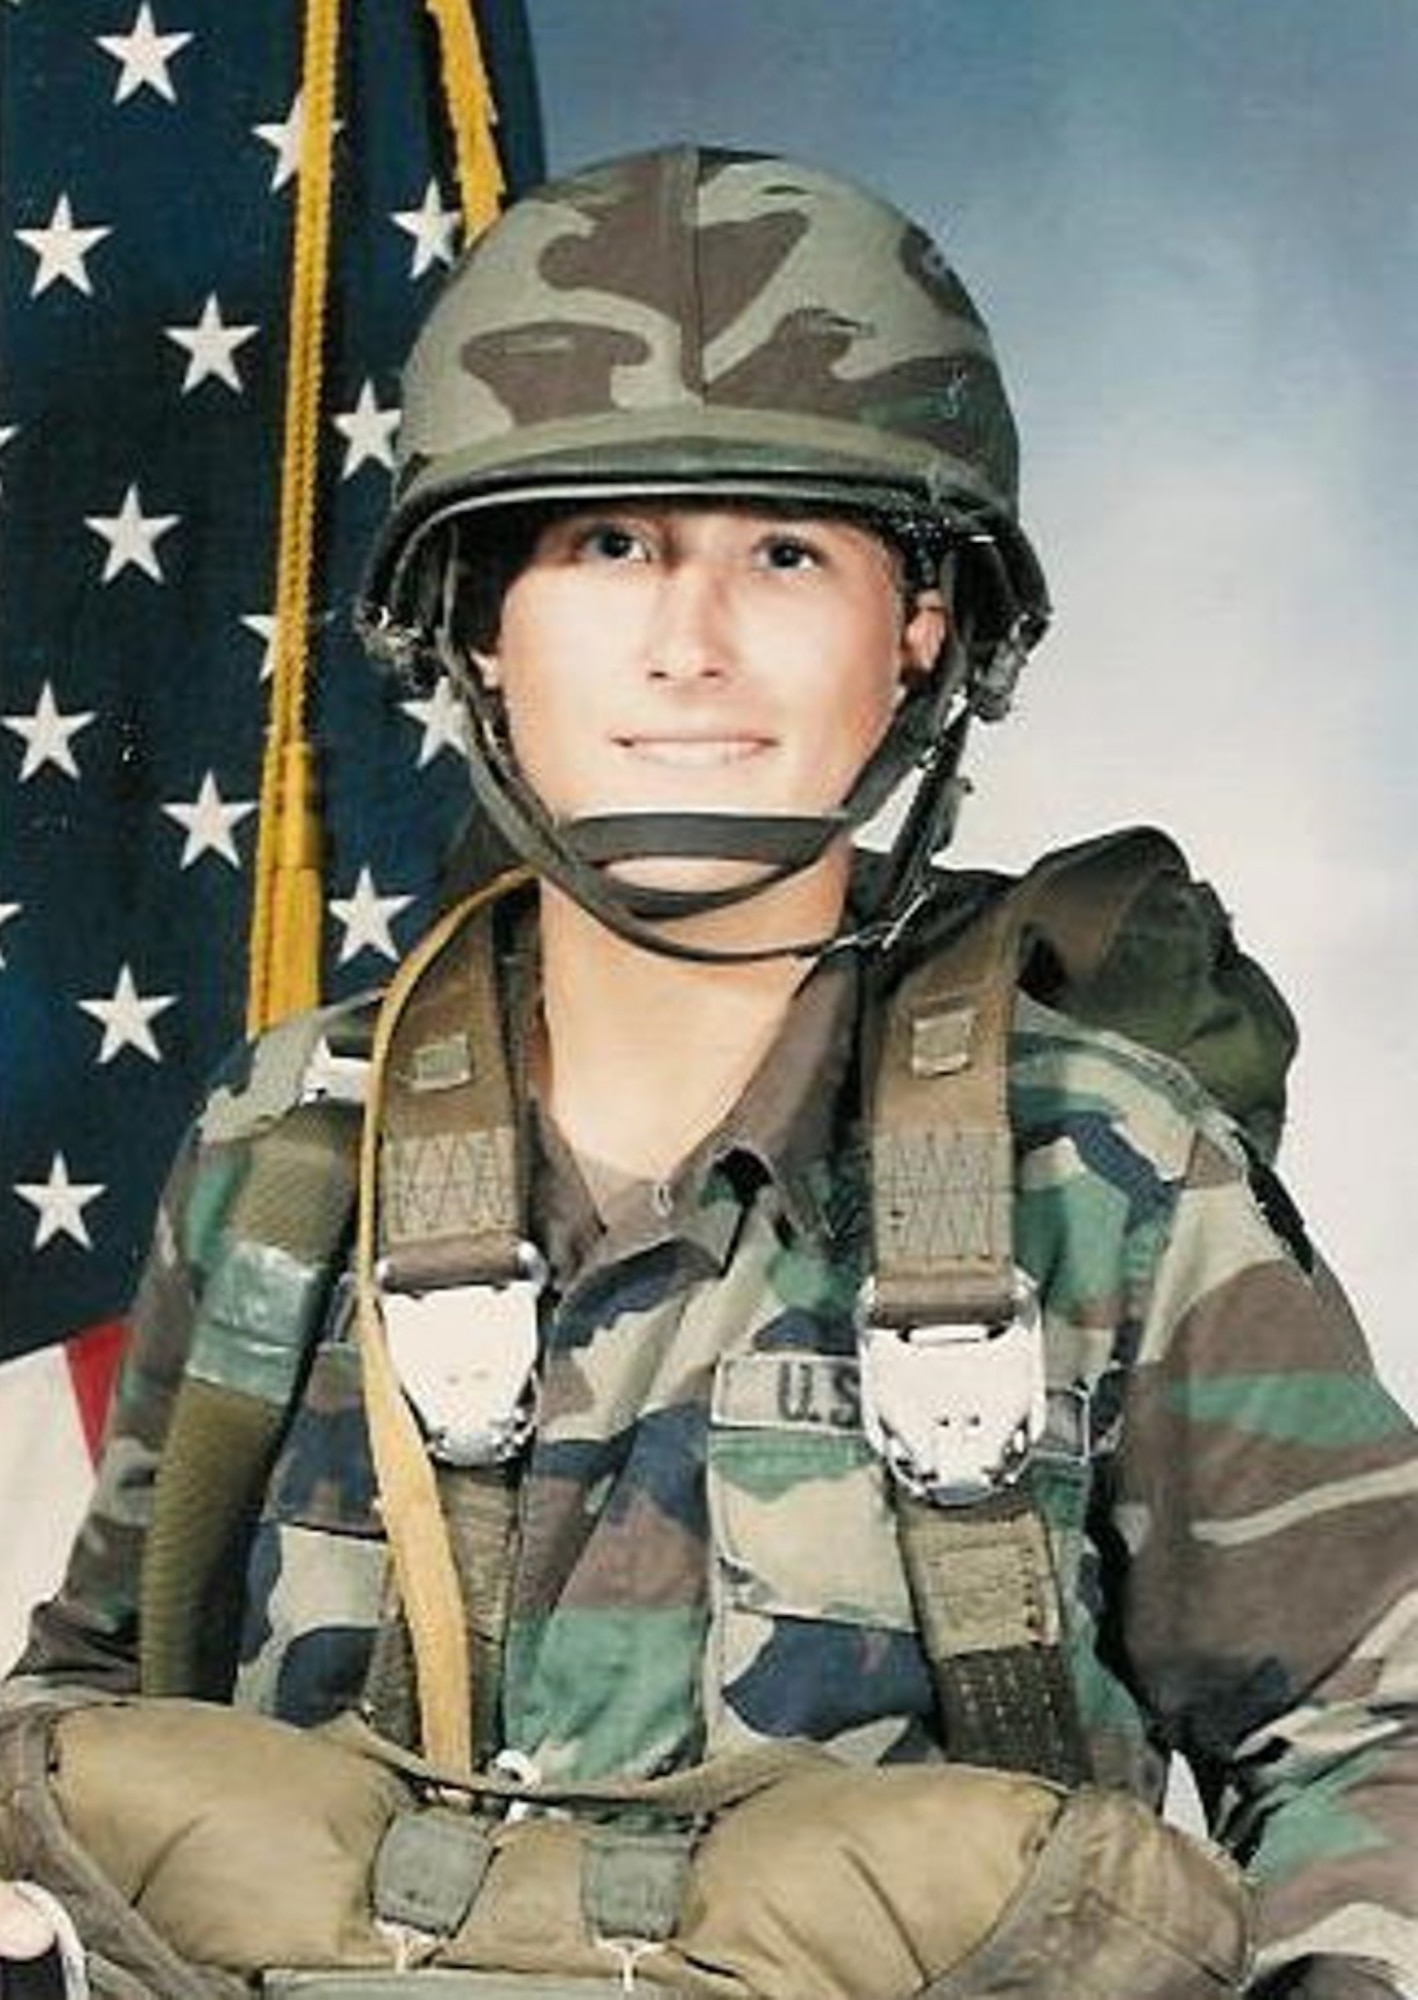 Kathleen Flarity, United States Army Airborne School, 1985, was known only as N-11 – N for NCO and 11, her assigned number – and was one of only nine women in a class of 500.